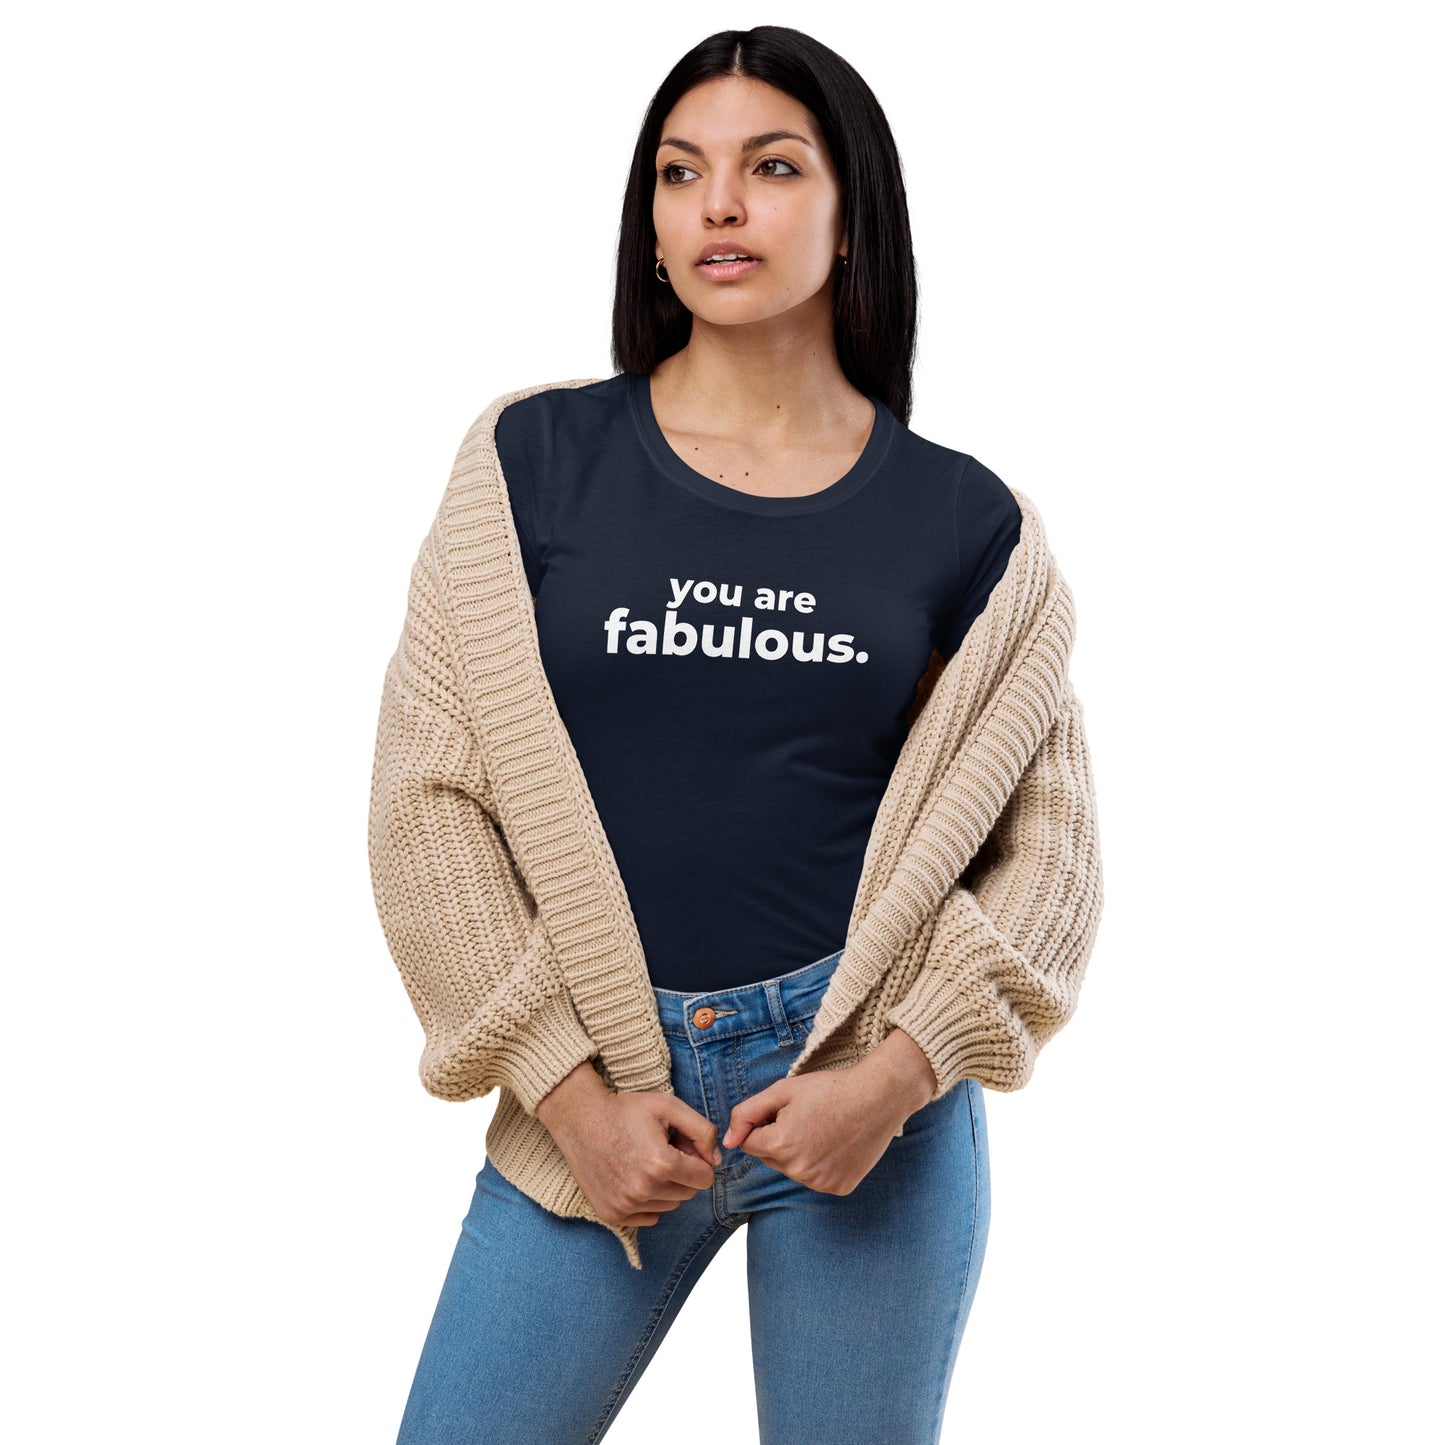 You are Fabulous - Women’s fitted t-shirt